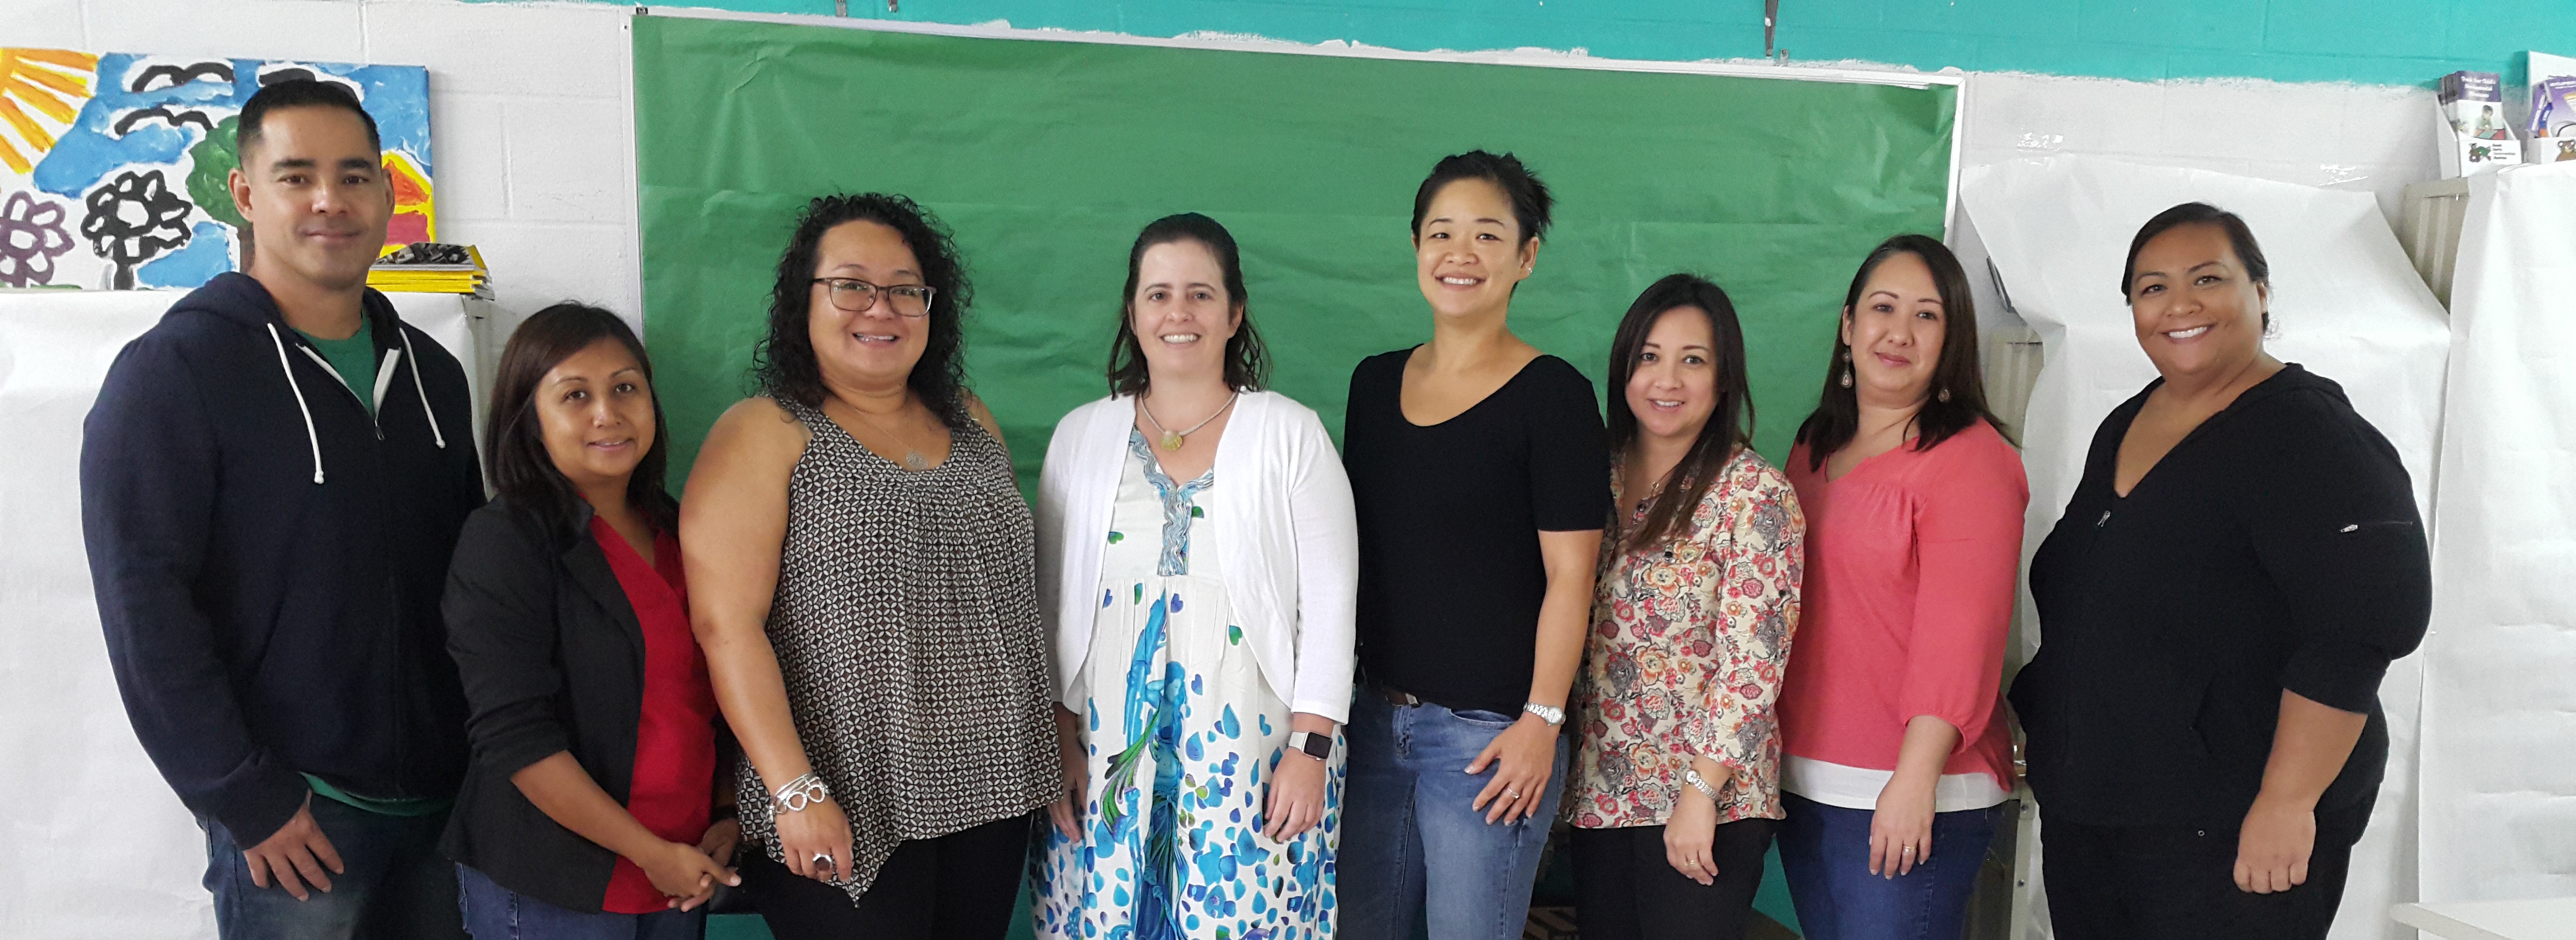 Guam ADOS-2 Cohort with Dr. Irina Zamora, ASD Trainer from USC.  Pictured L-R: Tom Babauta, Special Education Licensed Clinical Social Worker; Nicole Duenas, Speech Language Pathologist; Jessica Atoigue, Autism Technical Assistance Provider; Dr. Zamora; Gajee Parsons, Early Intervention Provider; Marita Gogue, School Psychologist; Tricia Taitague, Emotional Disabilities Program Coordinator; and Paula Ulloa, School Program Consultant.